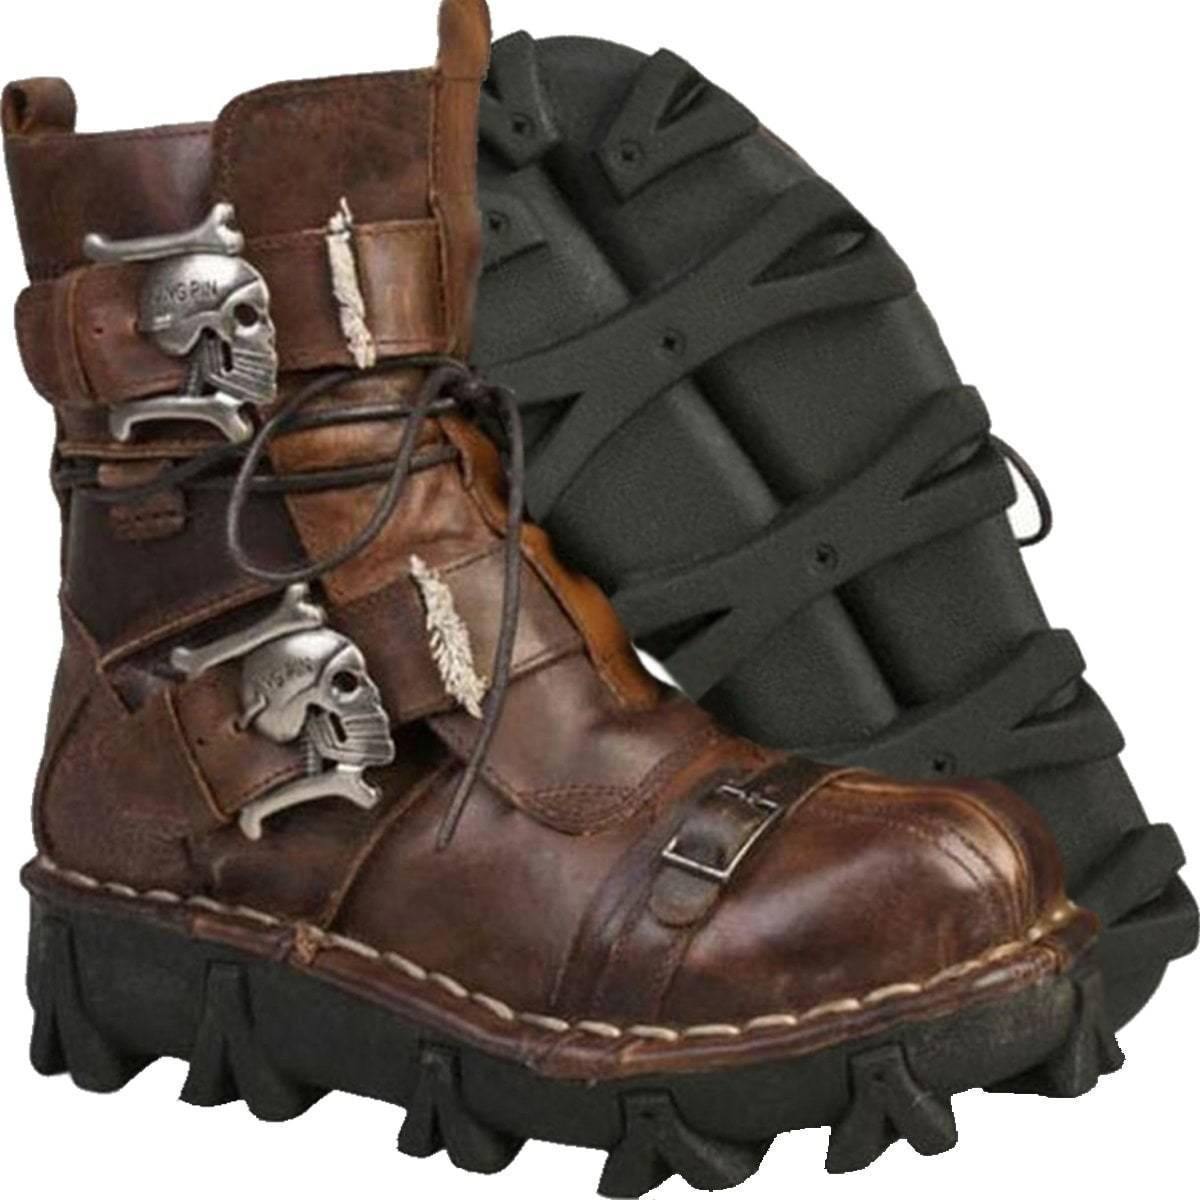 A pair of Handmade Leather Skull Boots with buckles.